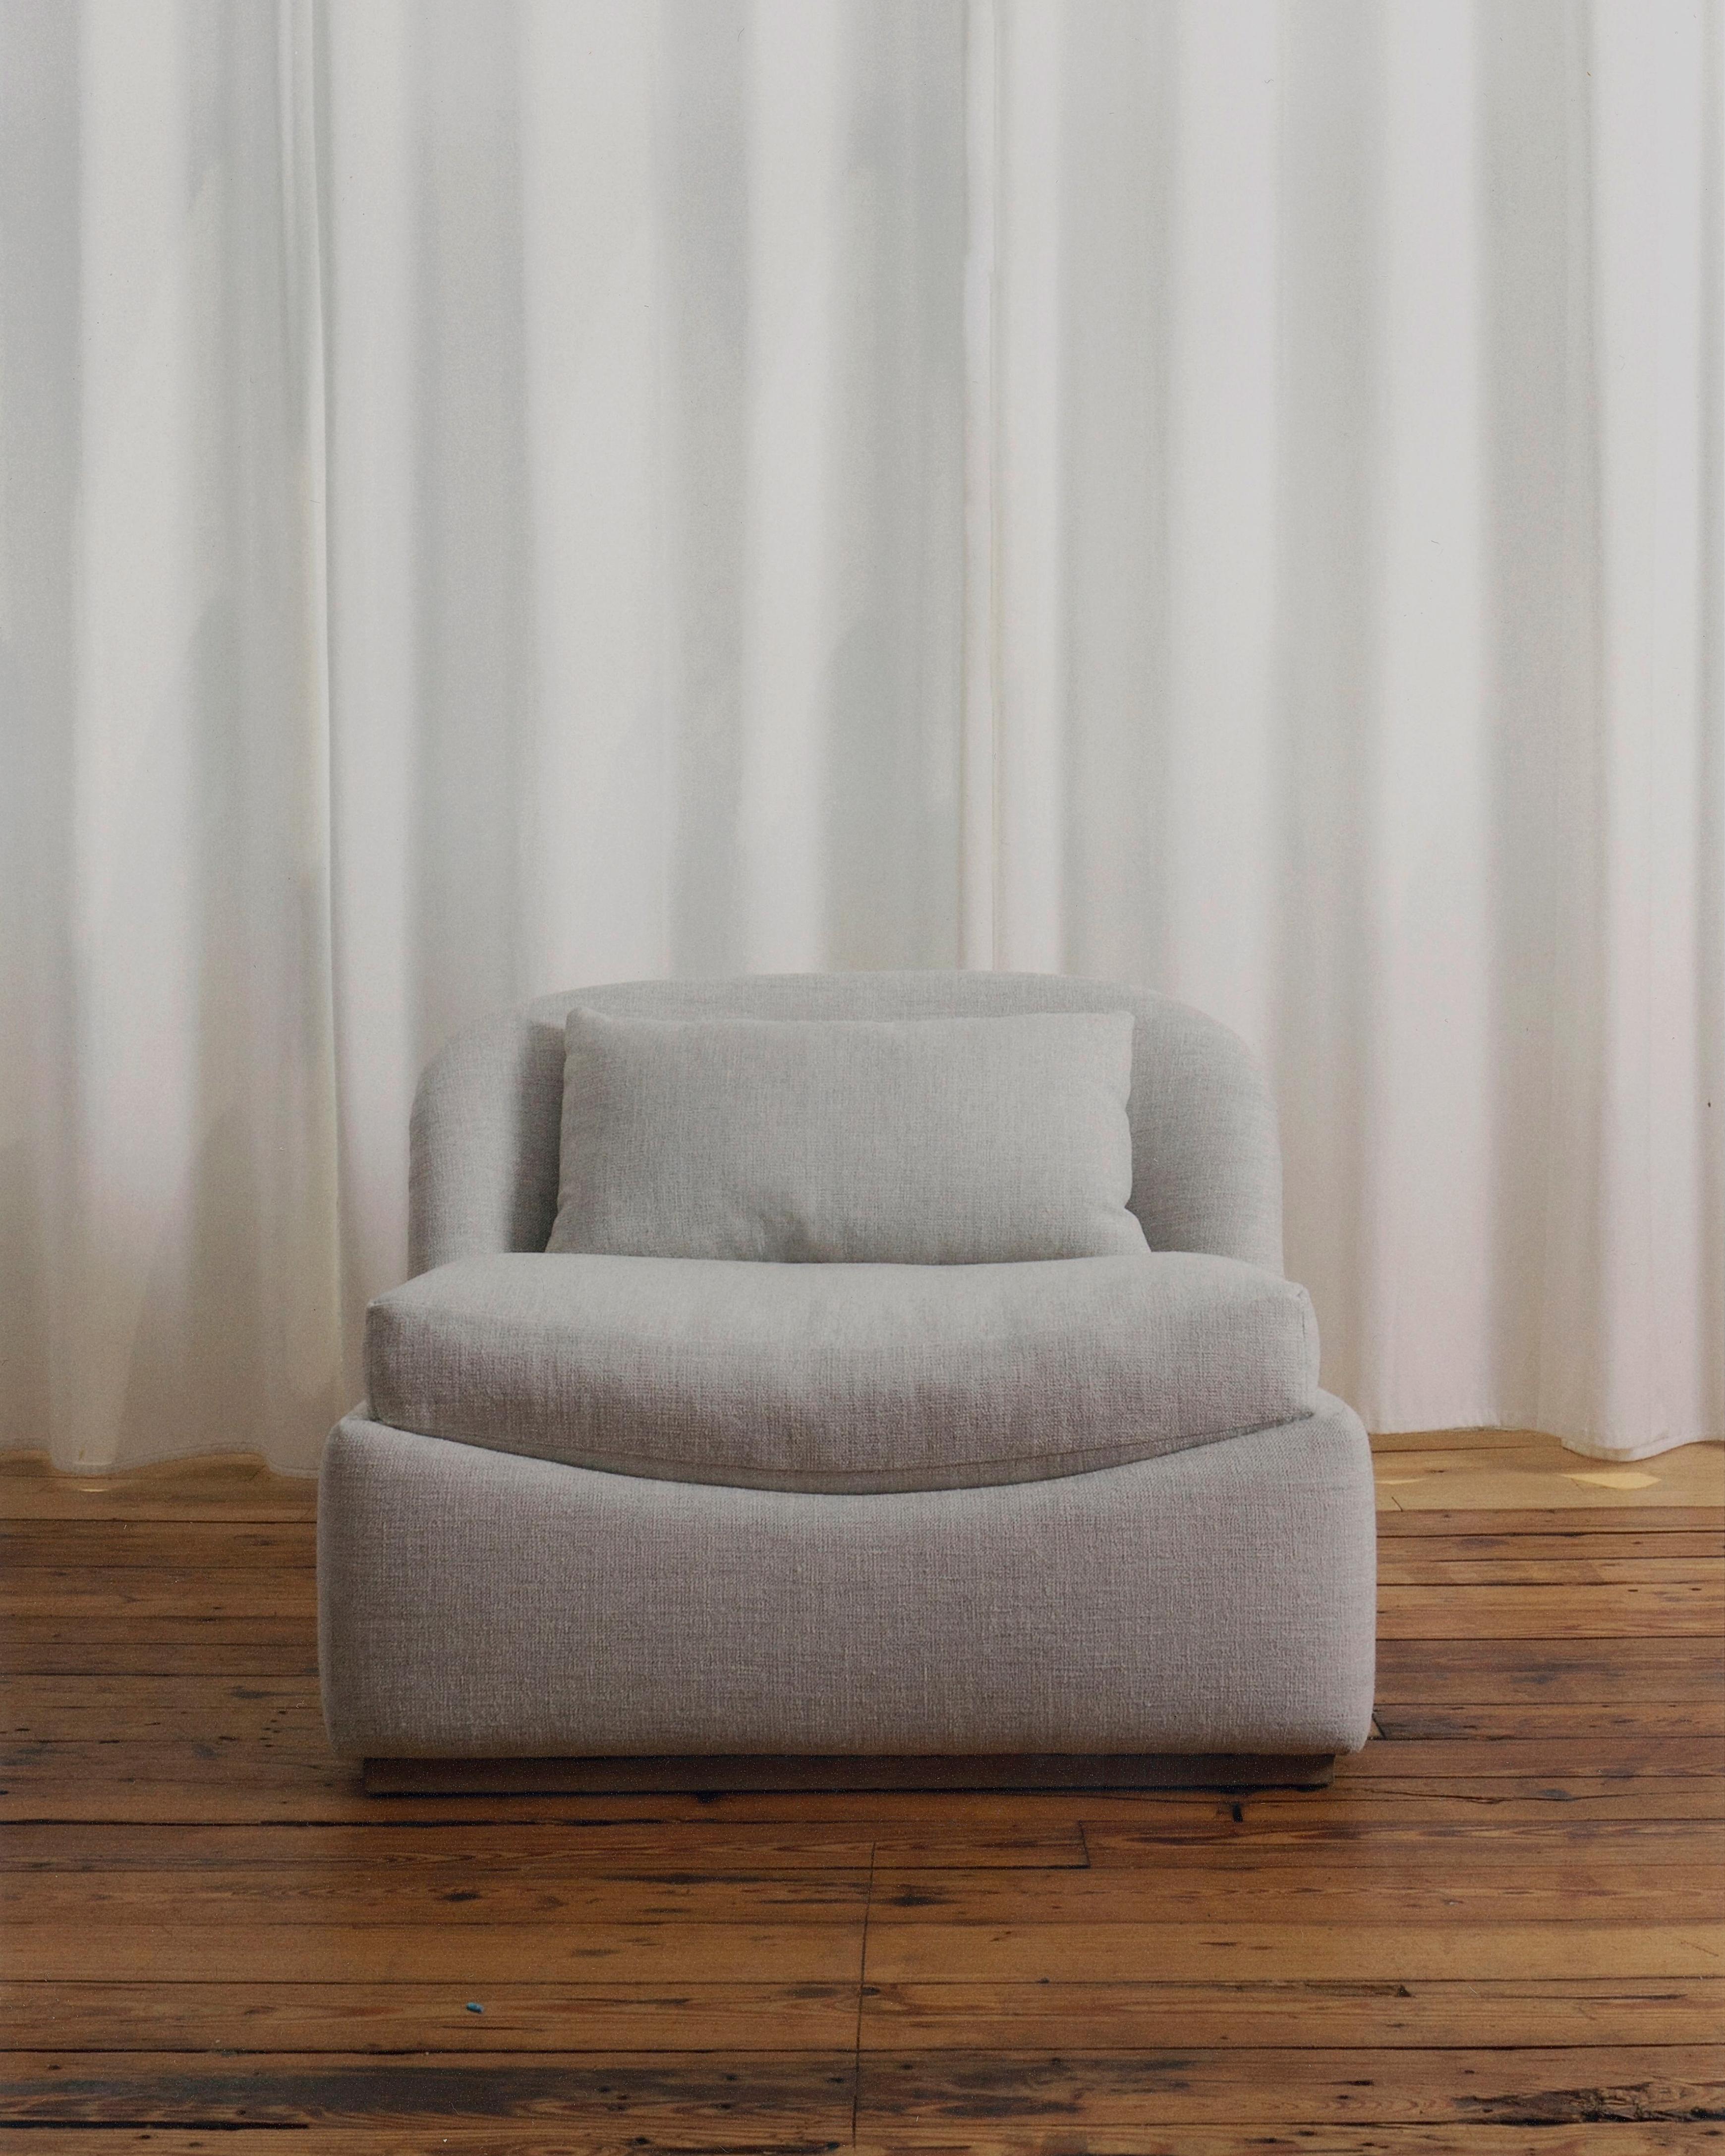 Low-slung chair embracing the sitter through it’s curved seat and backrest.
This piece is made to order and available in any combination fabric and wood.
Available in a Grande & Petite Size. Grand size shown in photos here.
------
Founded in 2017,